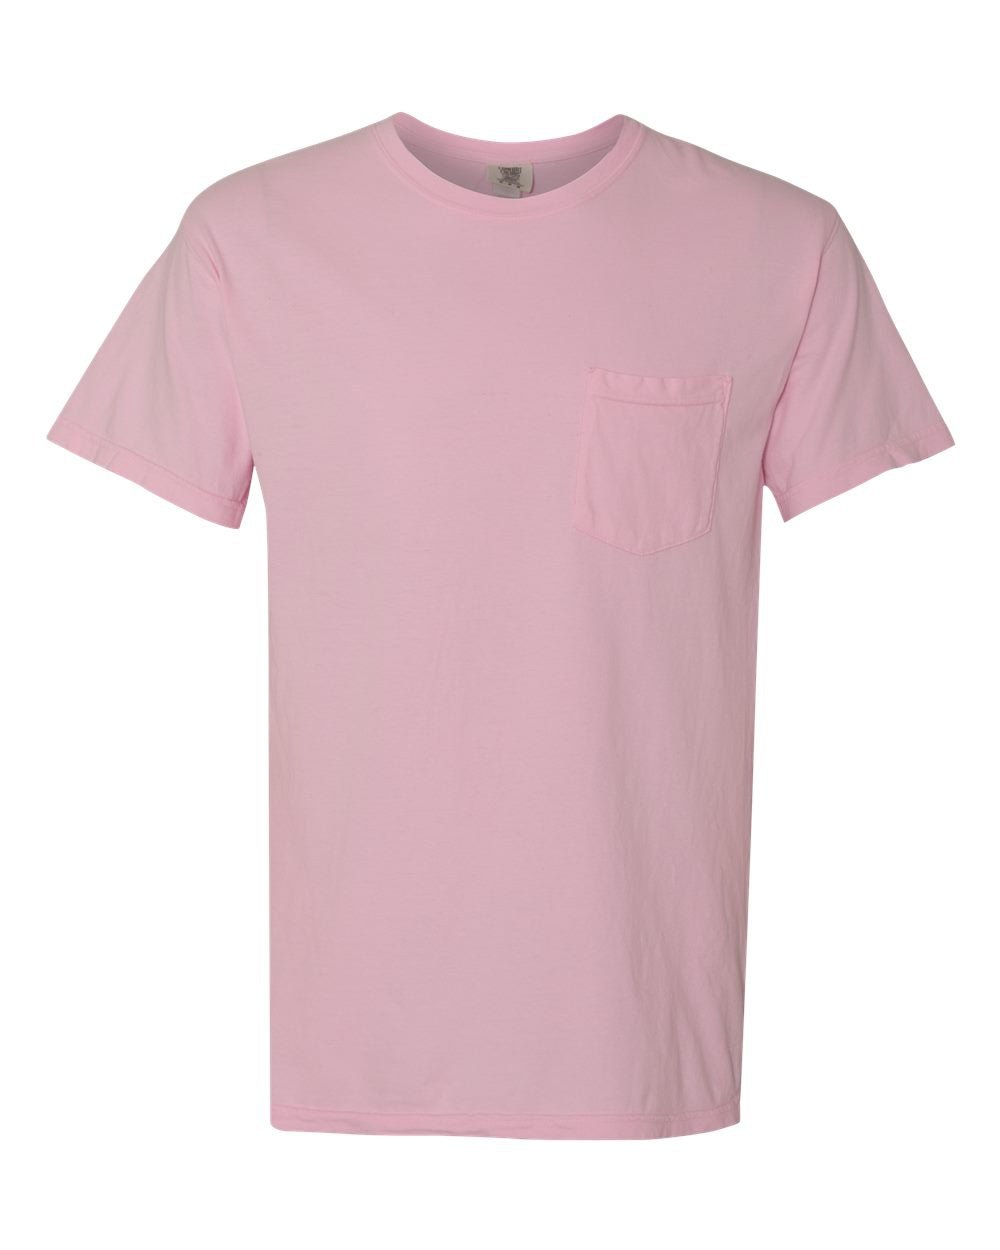 Comfort Colors Pocket Tee - Kite and Crest